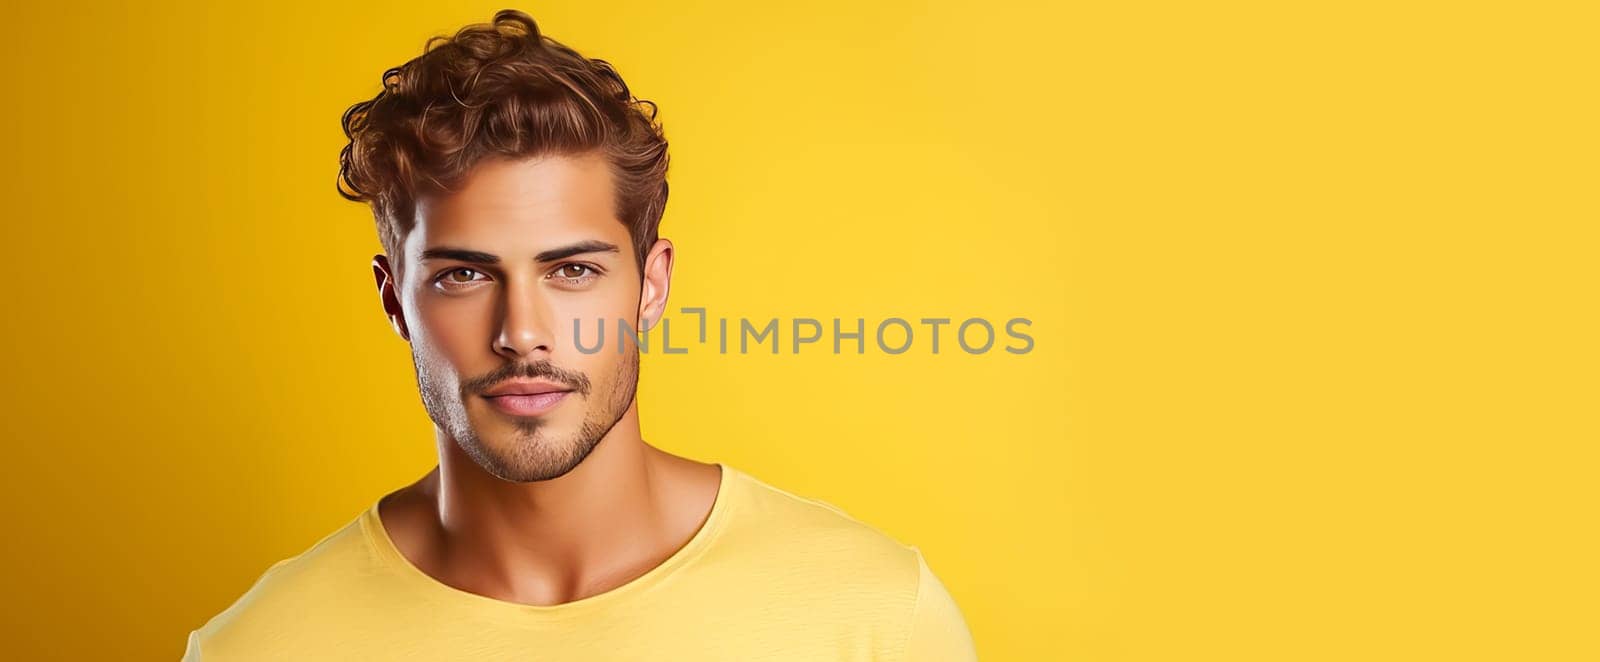 Portrait of an elegant sexy handsome serious Latino man with perfect skin, on a yellow background. Advertising of cosmetic products, spa treatments shampoos and hair care products, dentistry and medicine, perfumes and cosmetology for men